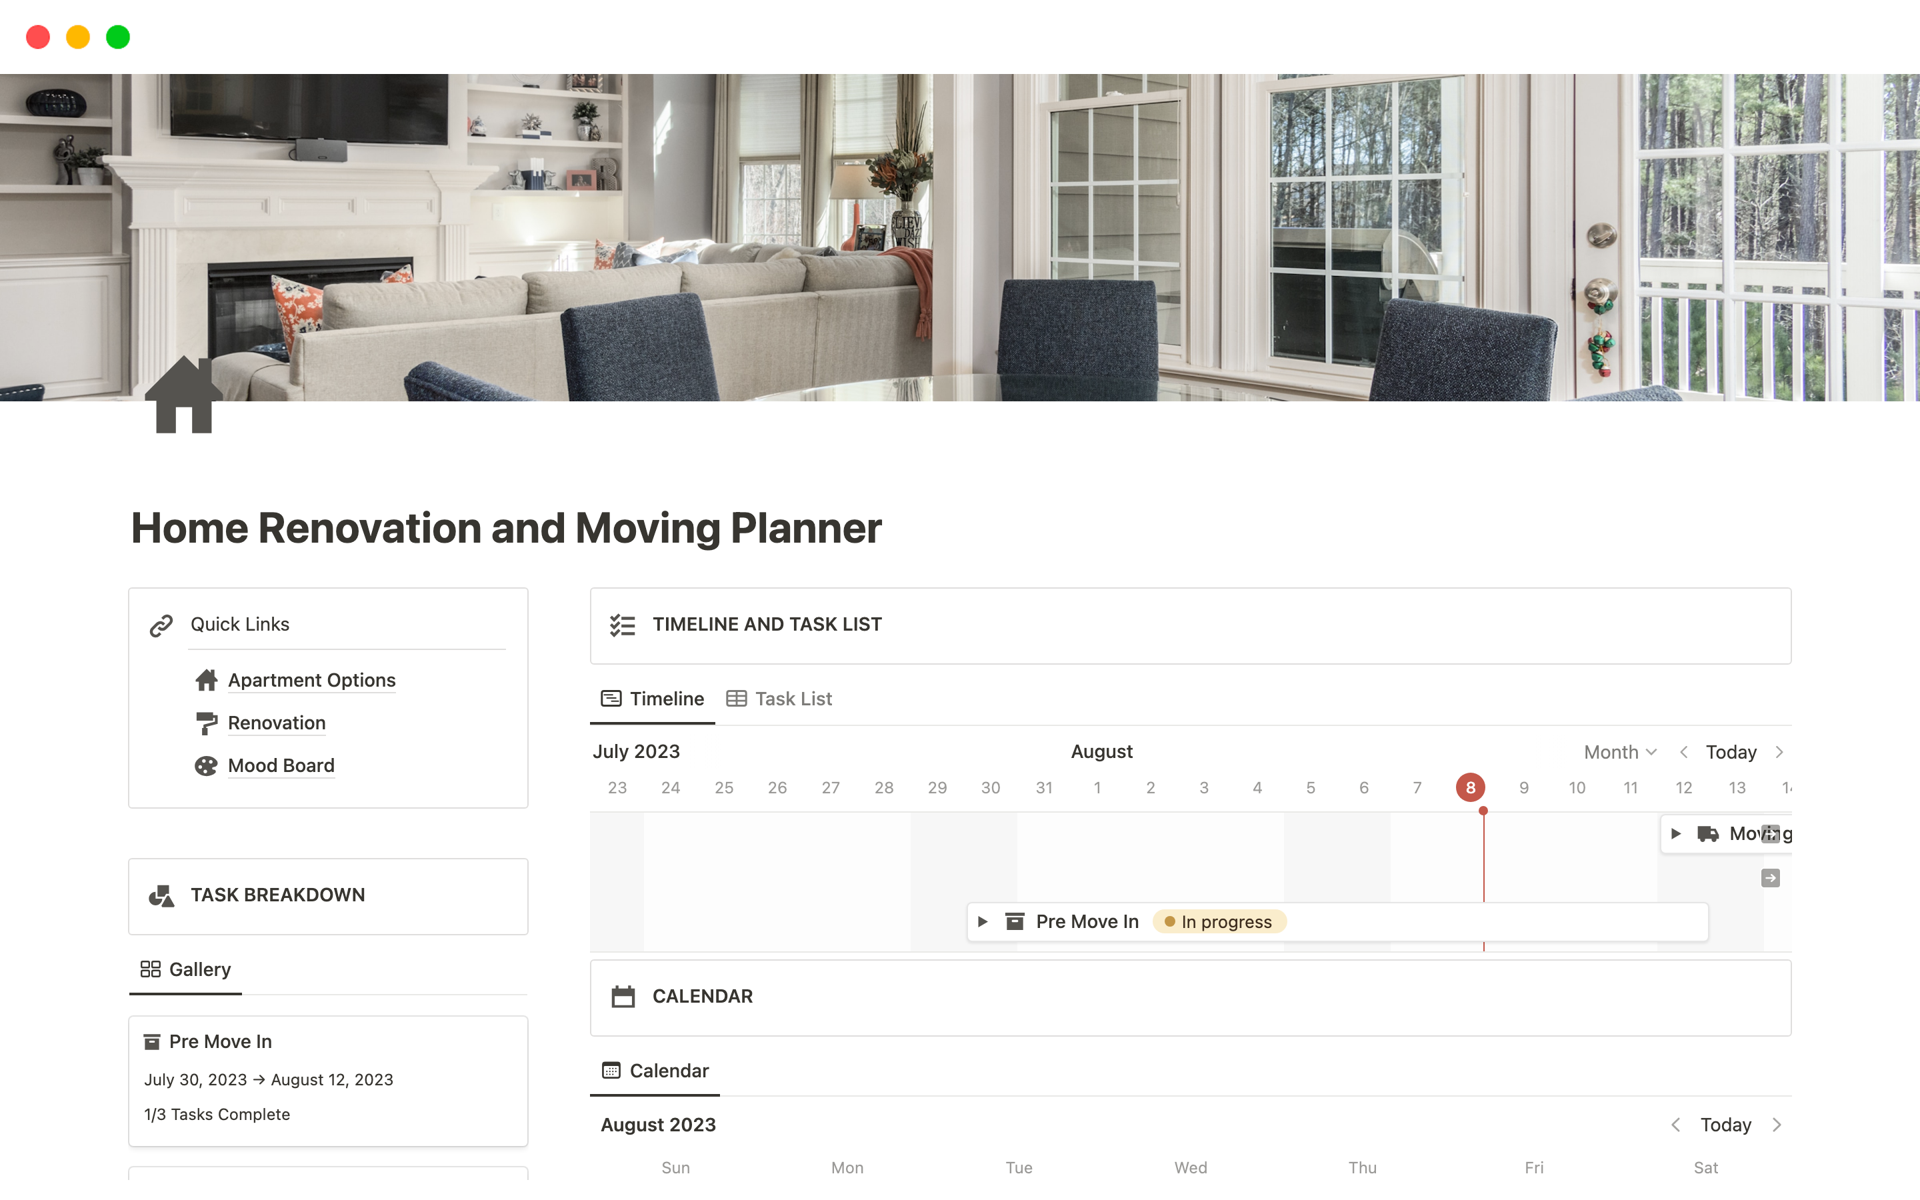 Your all in one space for tracking all your tasks from pre-move in, move in, to renovation!